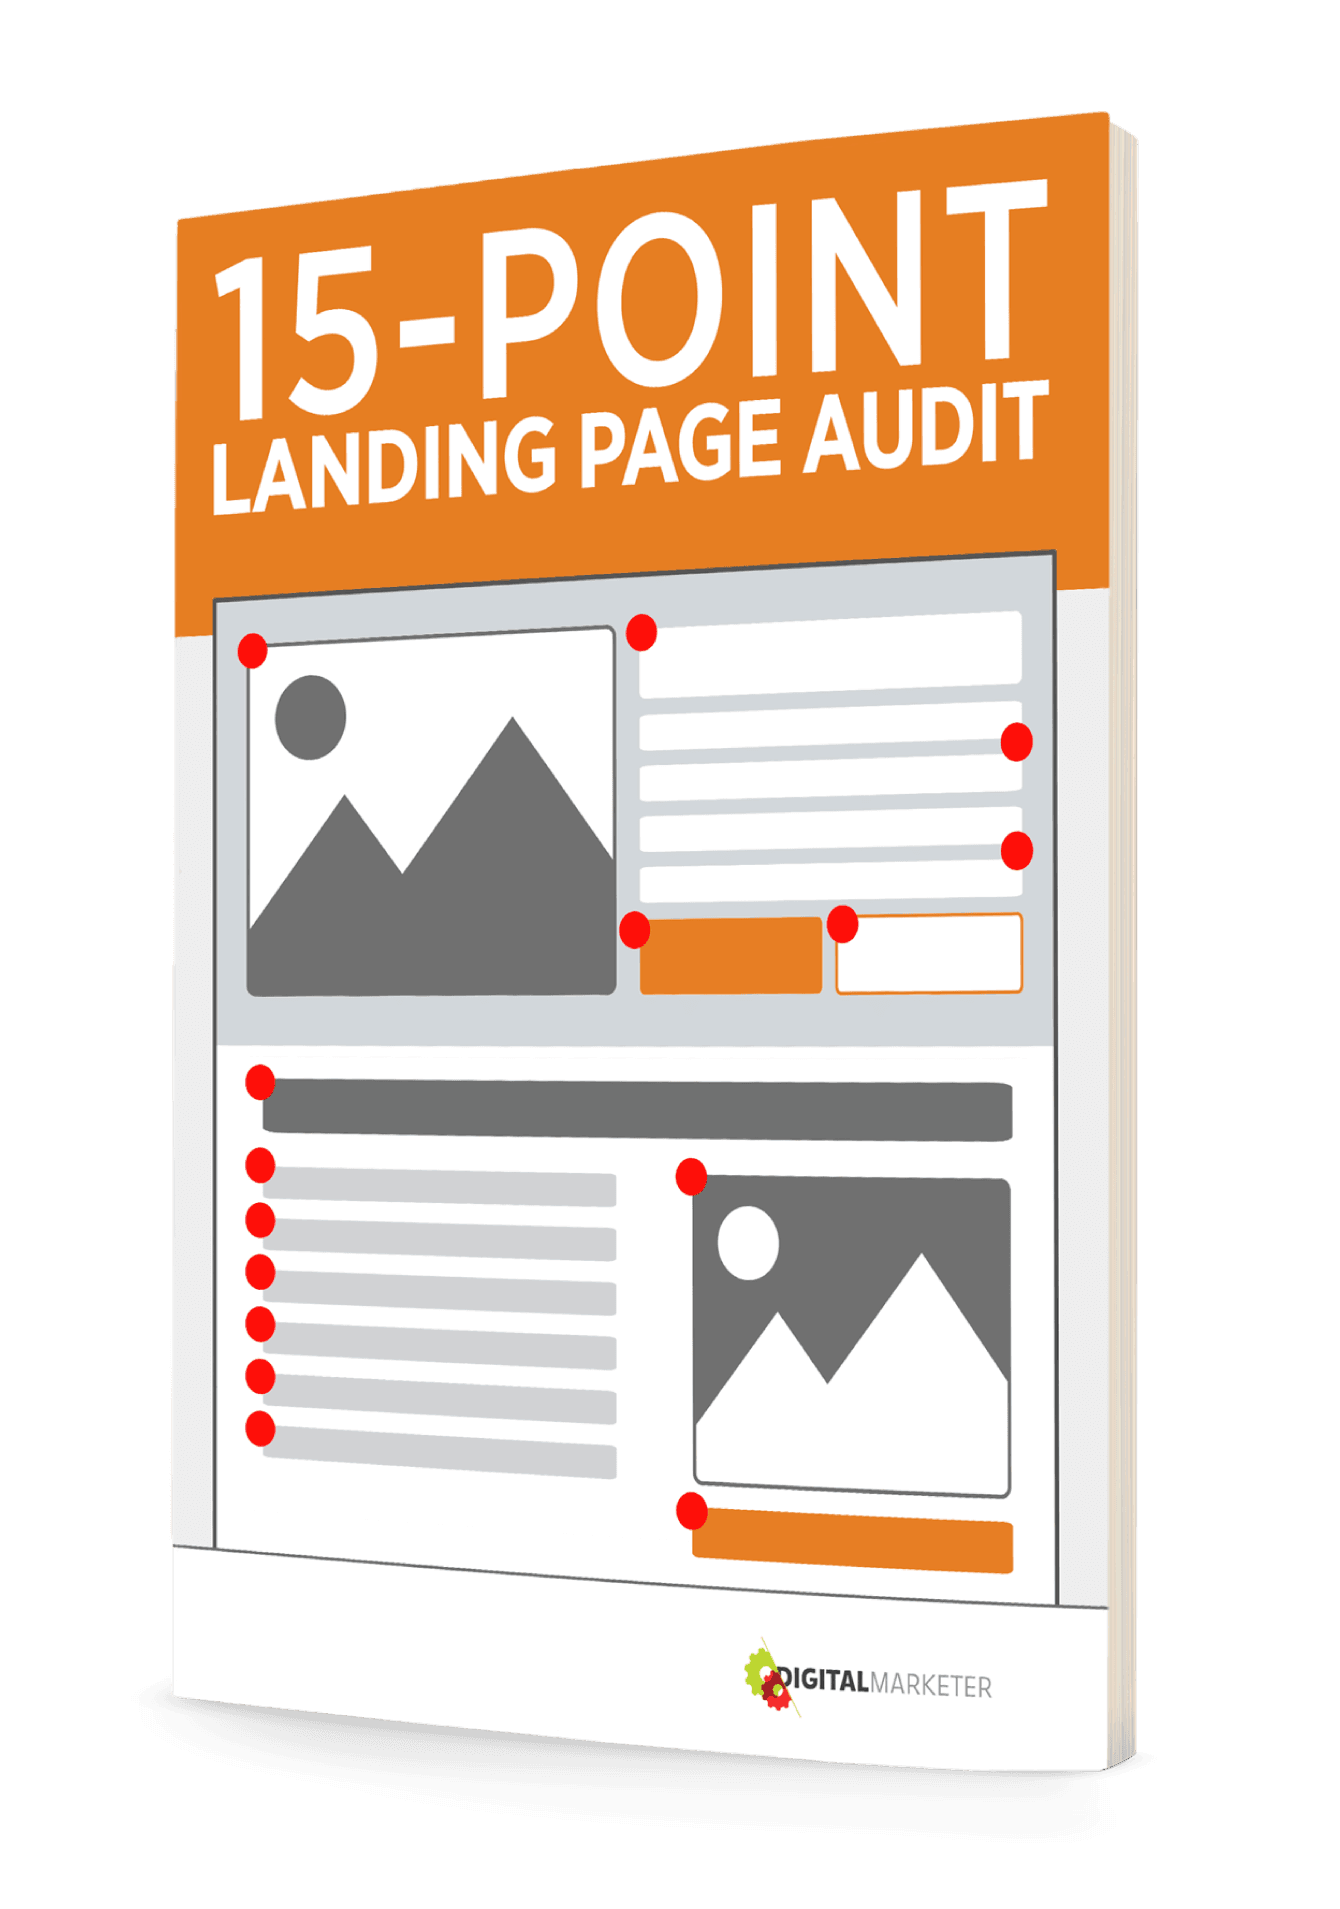 The 15-point Landing Page Audit